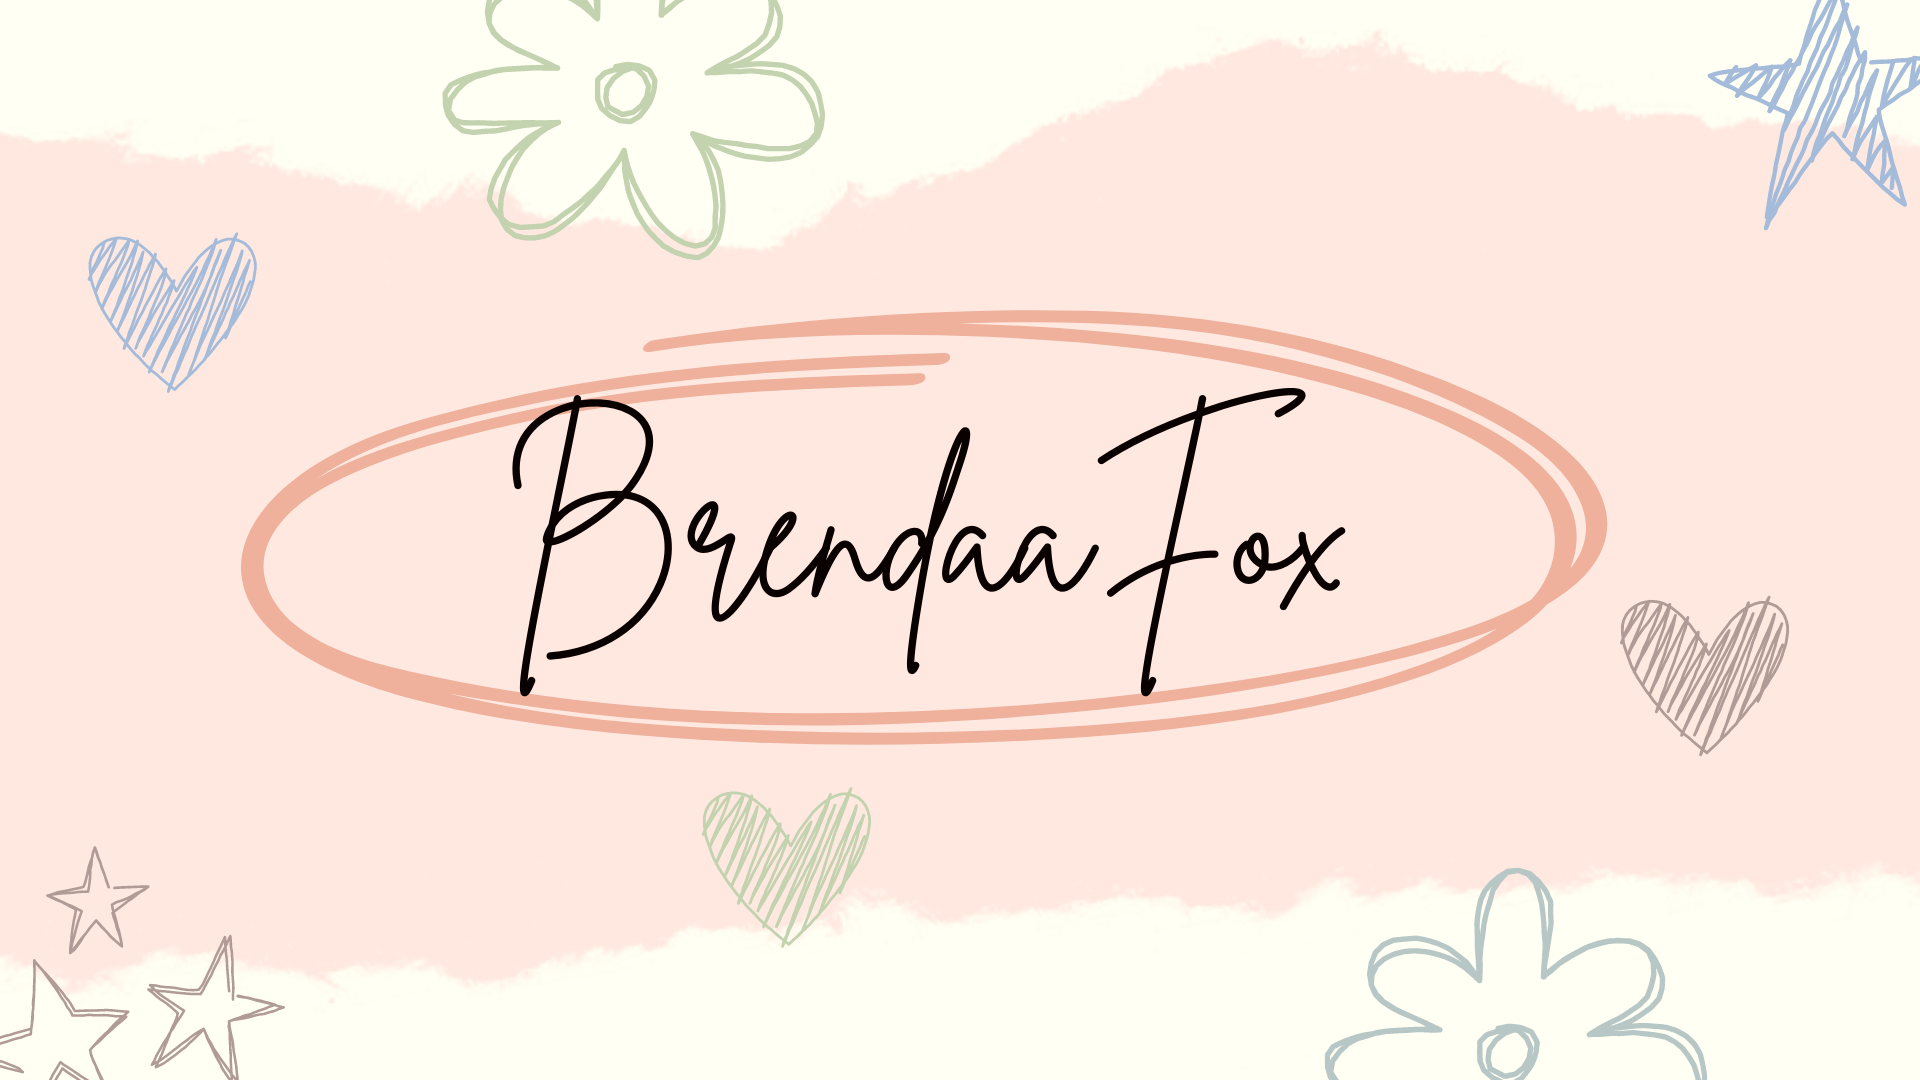 BrendaaFox About me image: 1